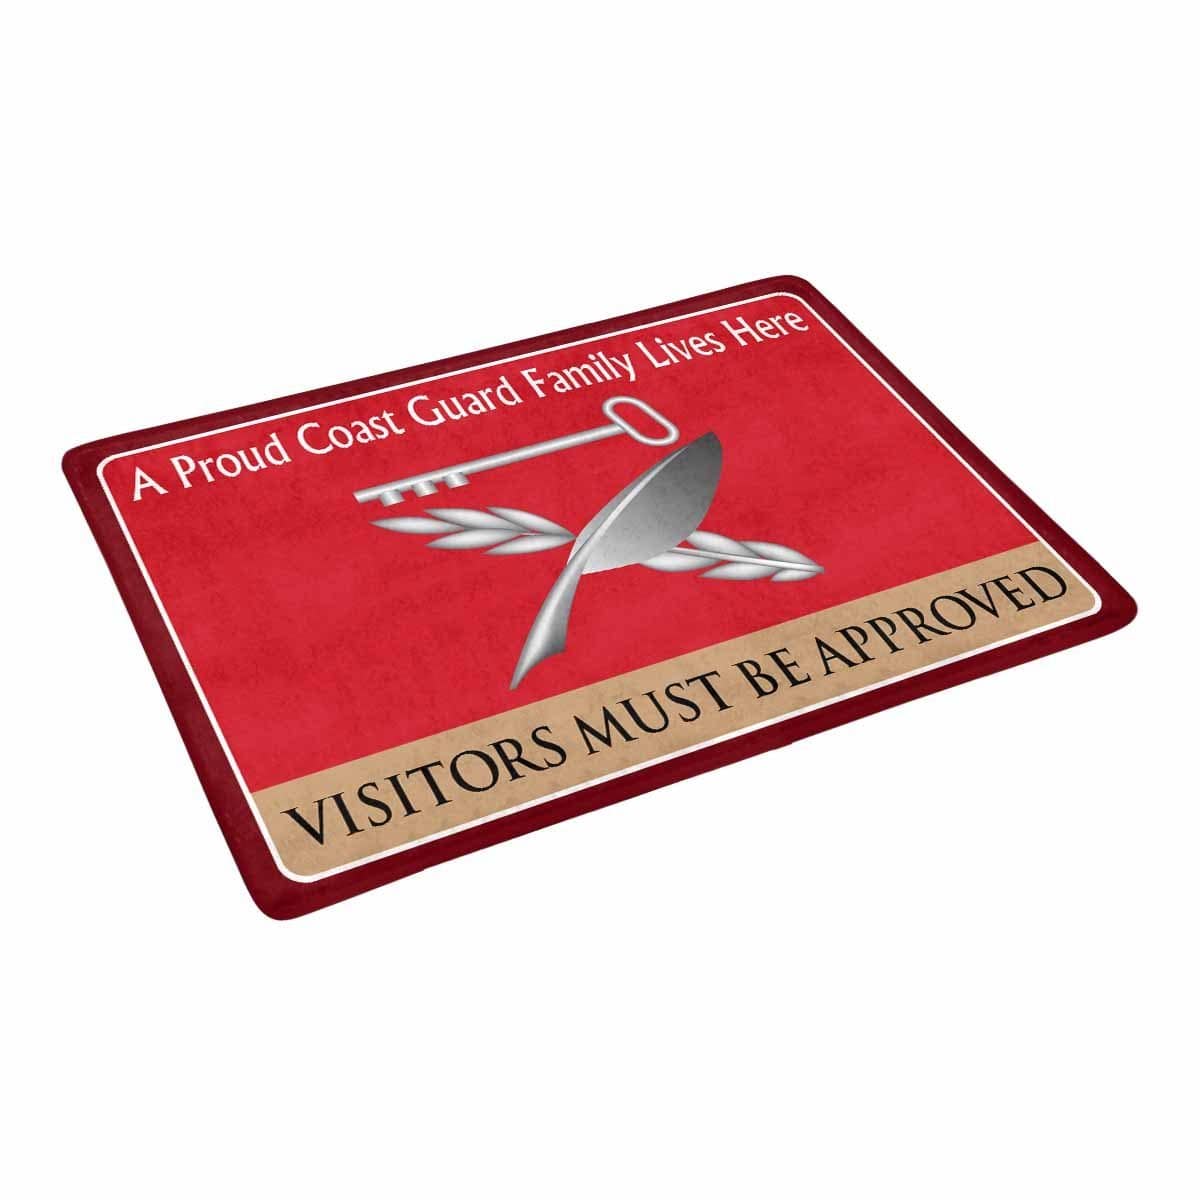 USCG CULINARY SPECIALIST CS Logo Family Doormat - Visitors must be approved (23.6 inches x 15.7 inches)-Doormat-USCG-Rate-Veterans Nation